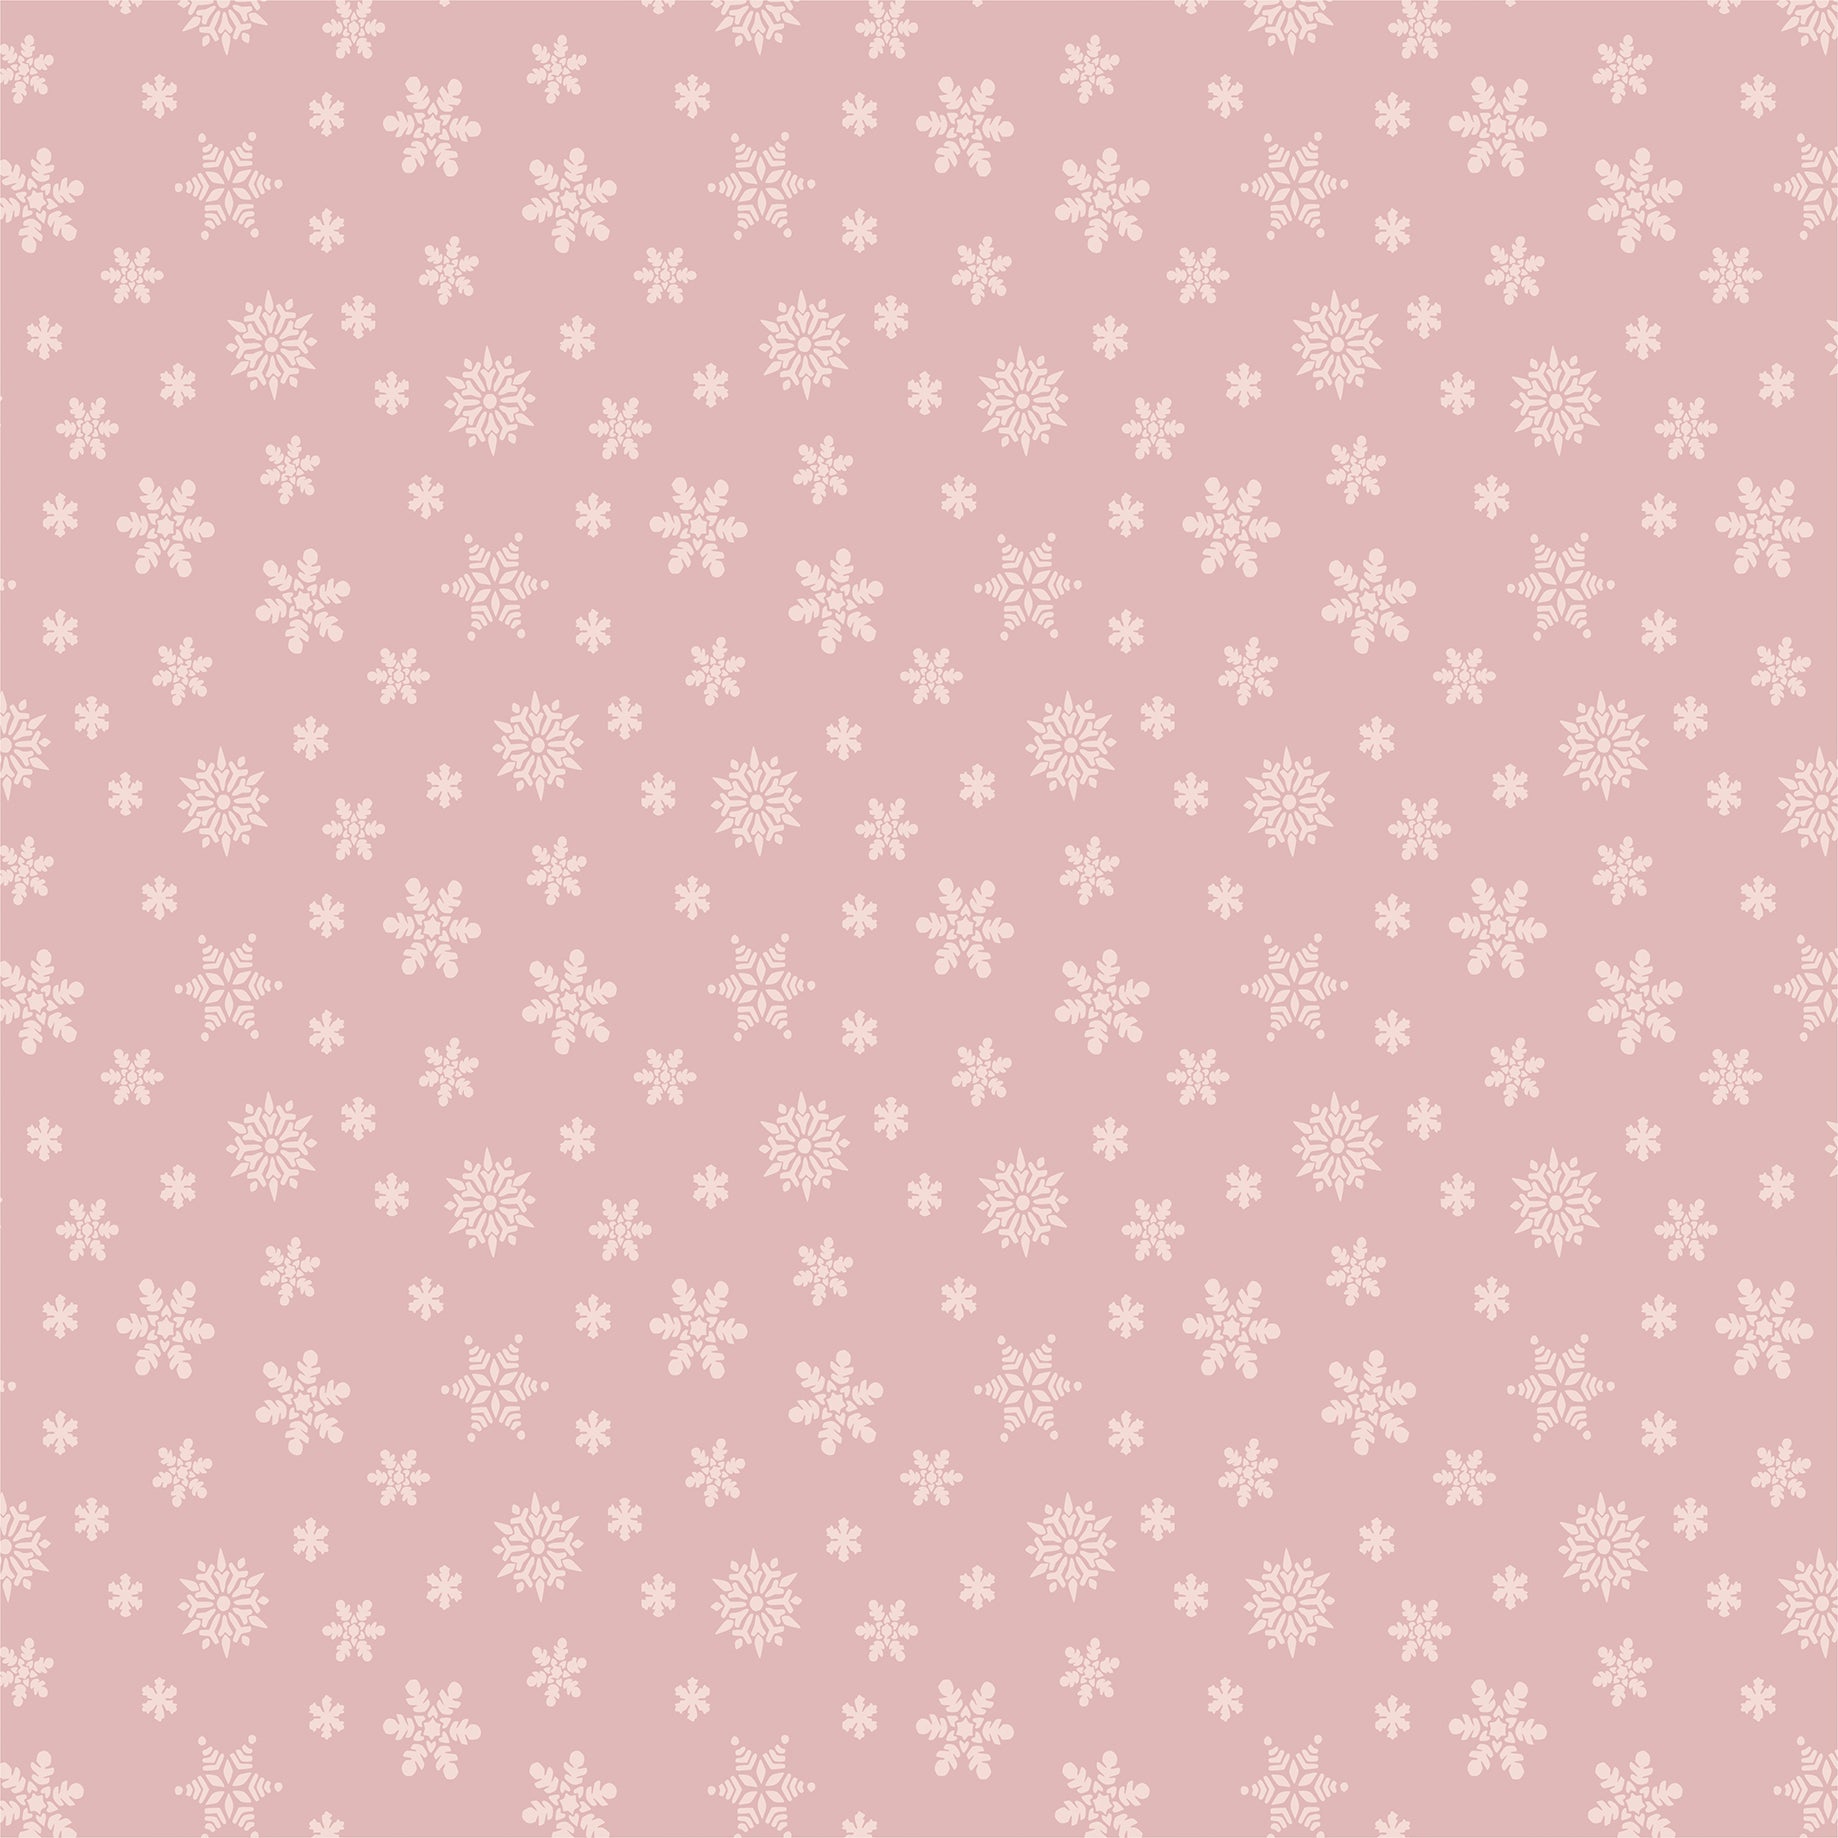 Winterland Collection Happy Polar Bears 12 x 12 Double-Sided Scrapbook Paper by Echo Park Paper